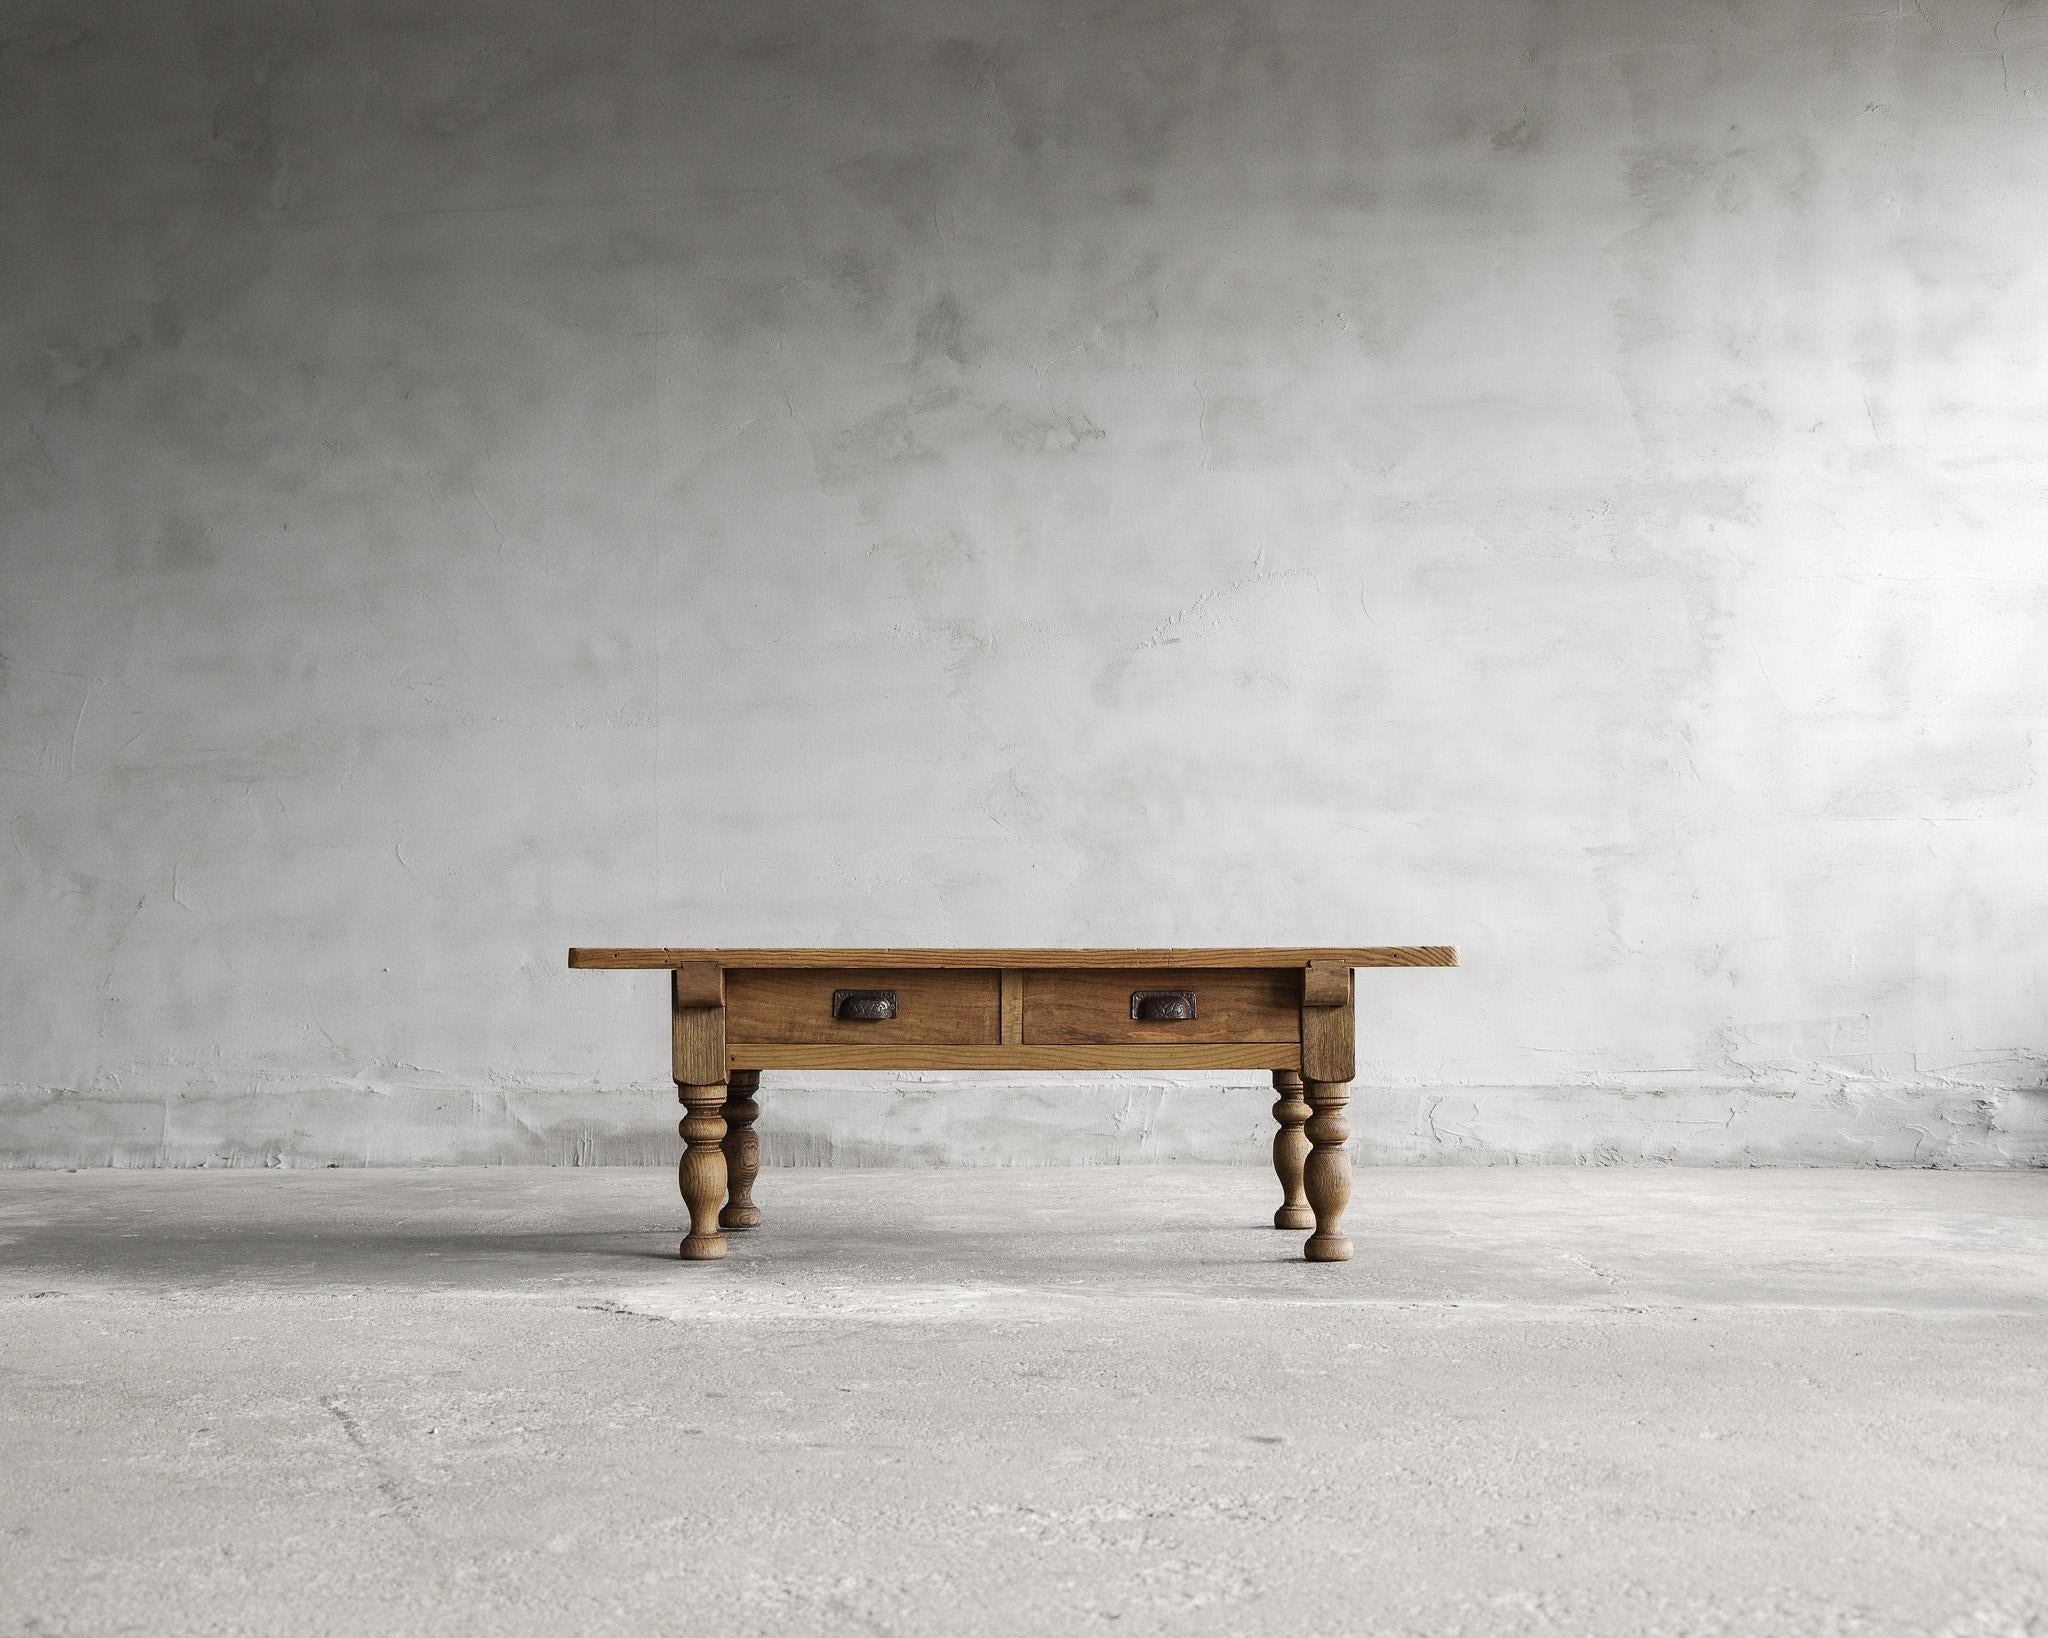 This is a Japanese antique low table.
It was made in the Taisyo Period(1912-1926).

The tabletop, made from japanese pine wood, boasts a gentle grain that exudes natural warmth and texture. Complementing the beauty of the tabletop are the legs